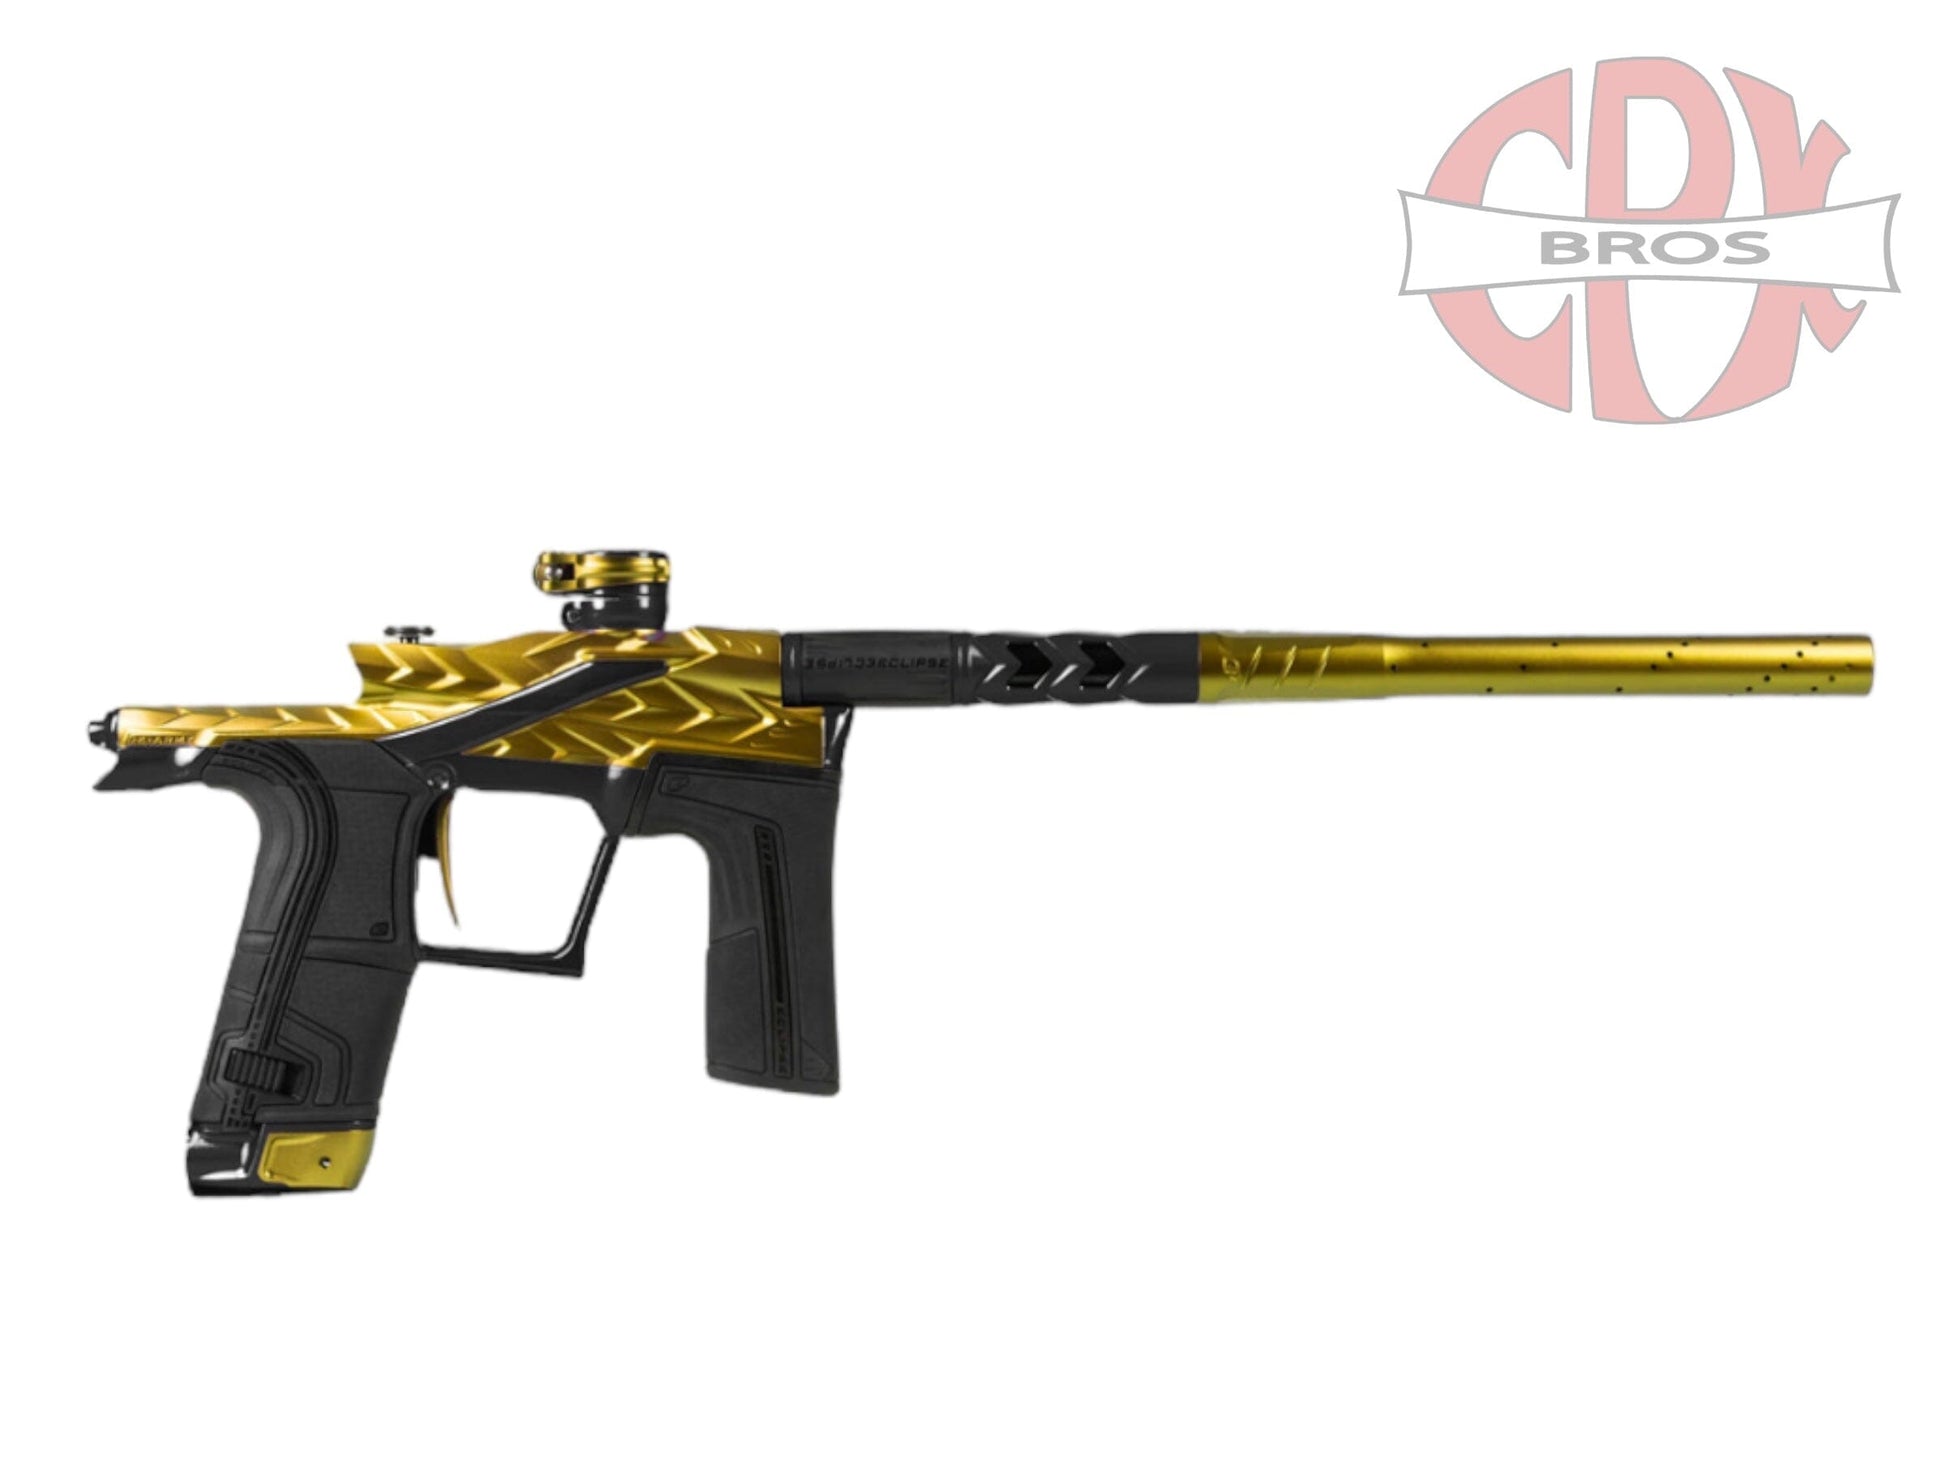 Used NEW HK FOSSIL- ECLIPSE LV2 - Midas Paintball Gun from CPXBrosPaintball Buy/Sell/Trade Paintball Markers, Paintball Hoppers, Paintball Masks, and Hormesis Headbands